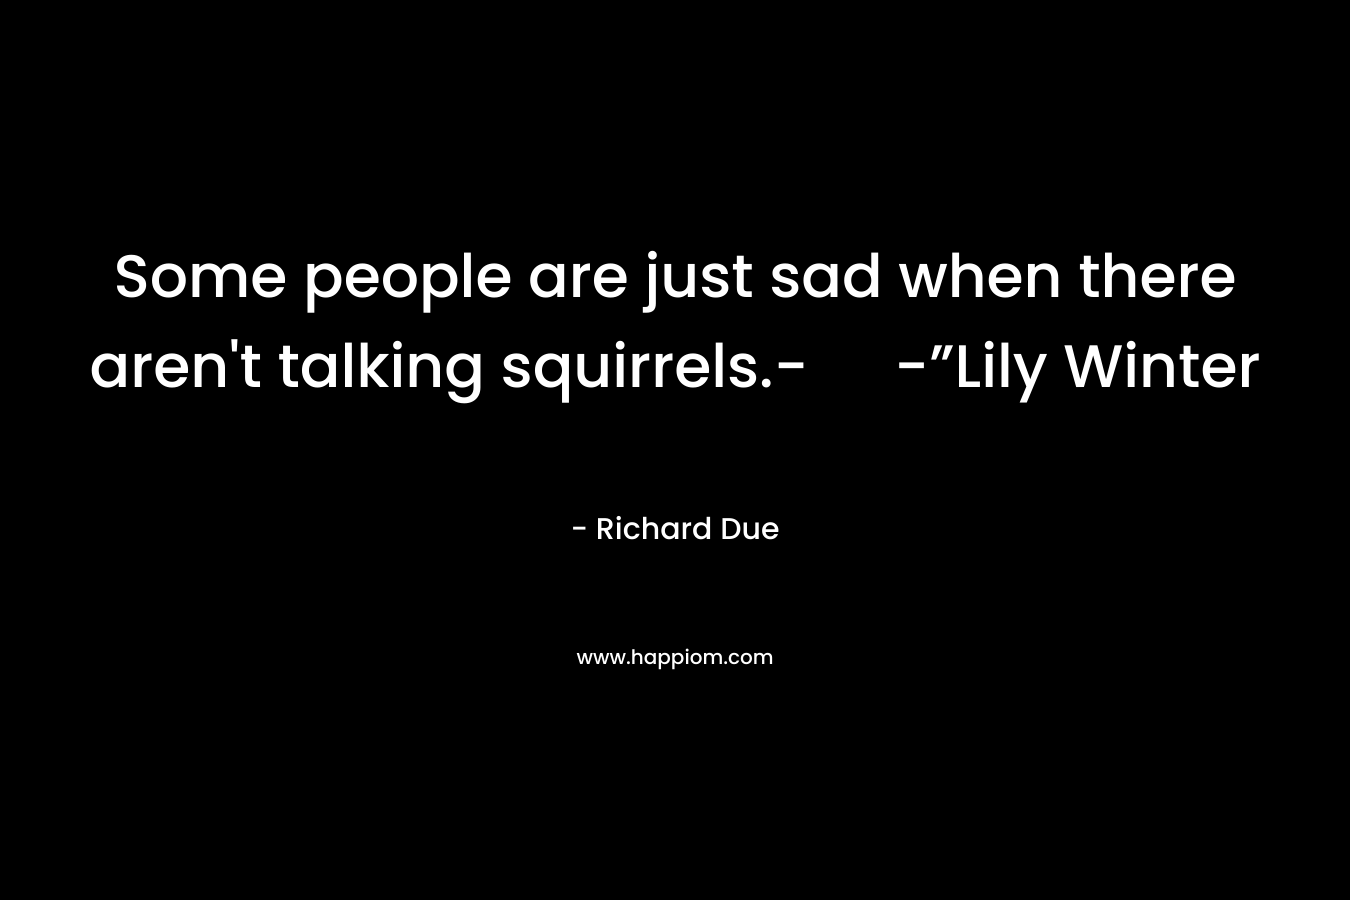 Some people are just sad when there aren't talking squirrels.- -”Lily Winter